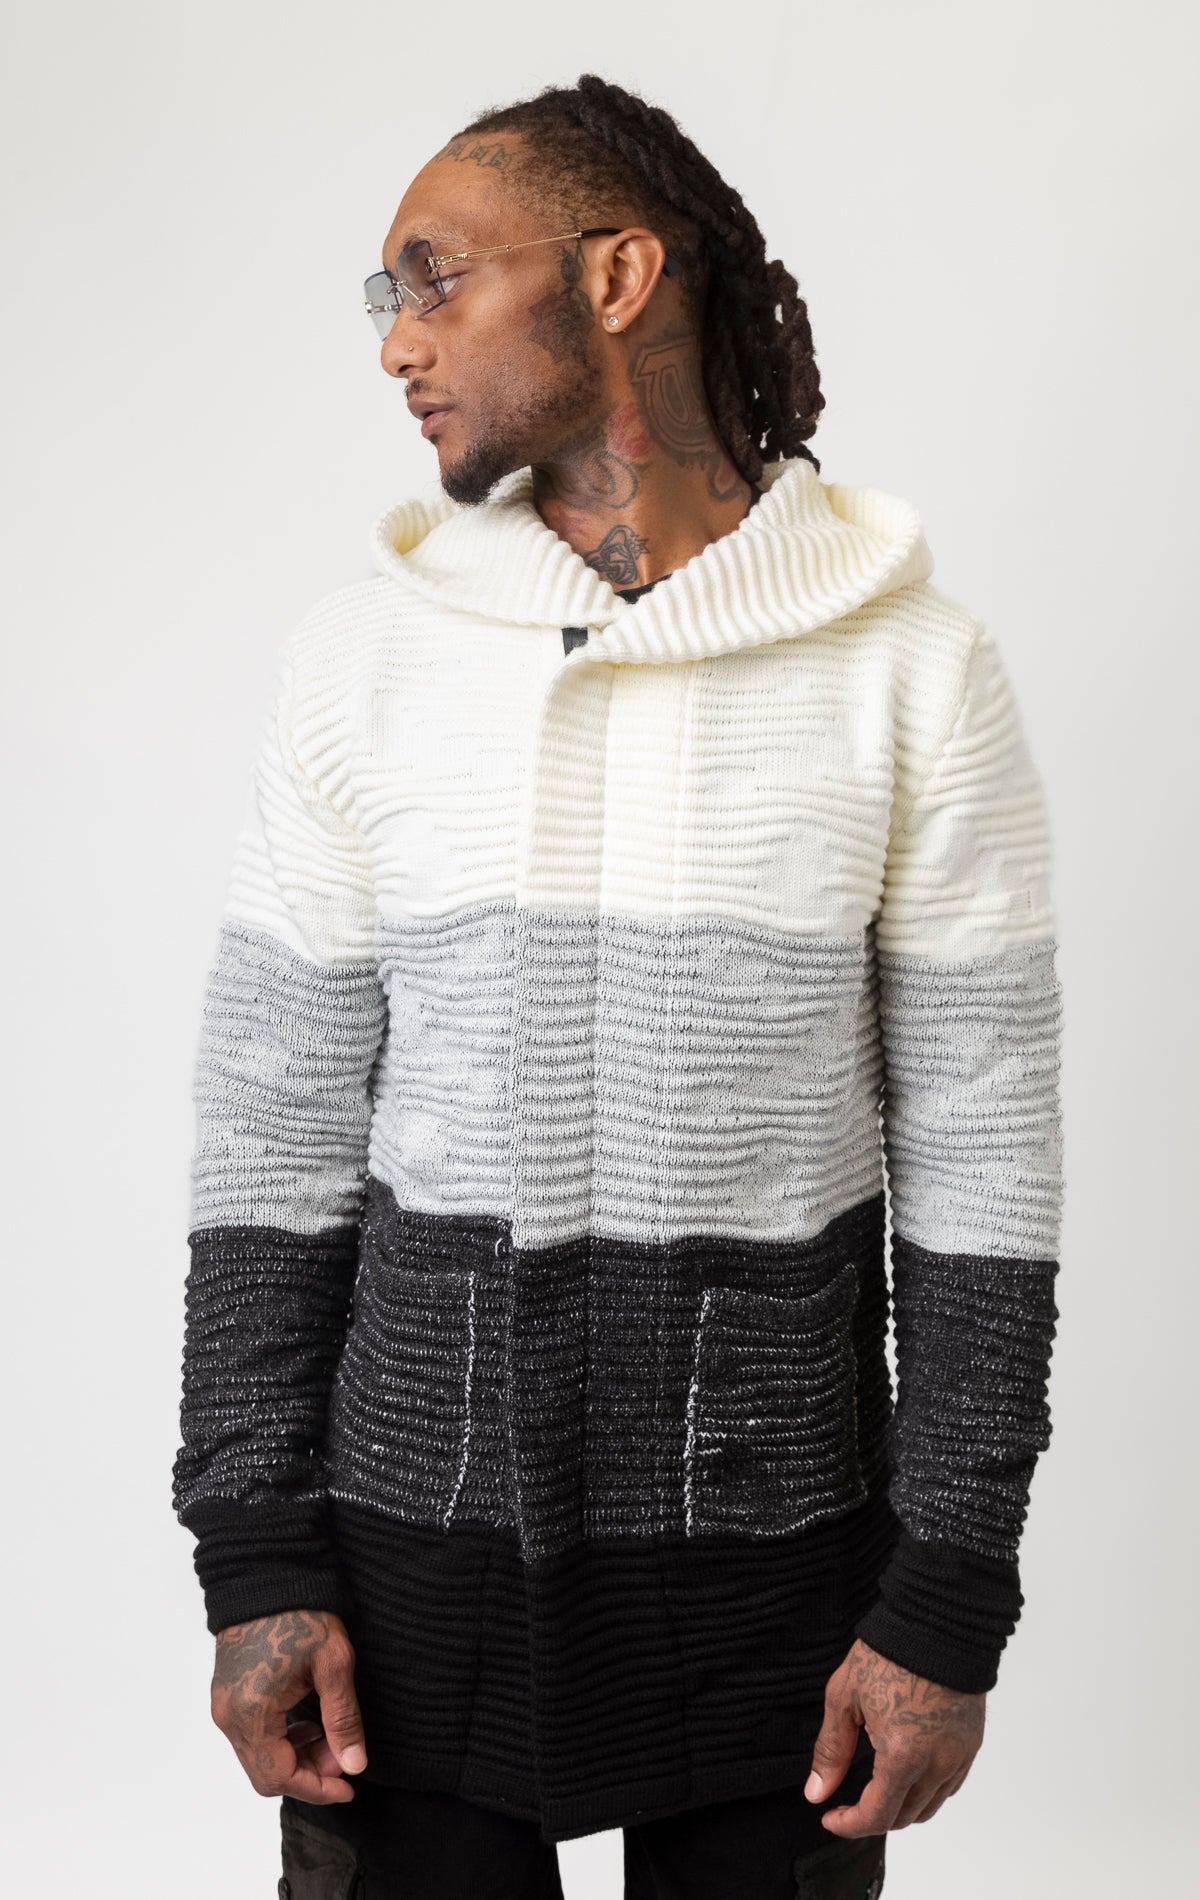 Three-tone cardigan sweater featuring a hoodie.